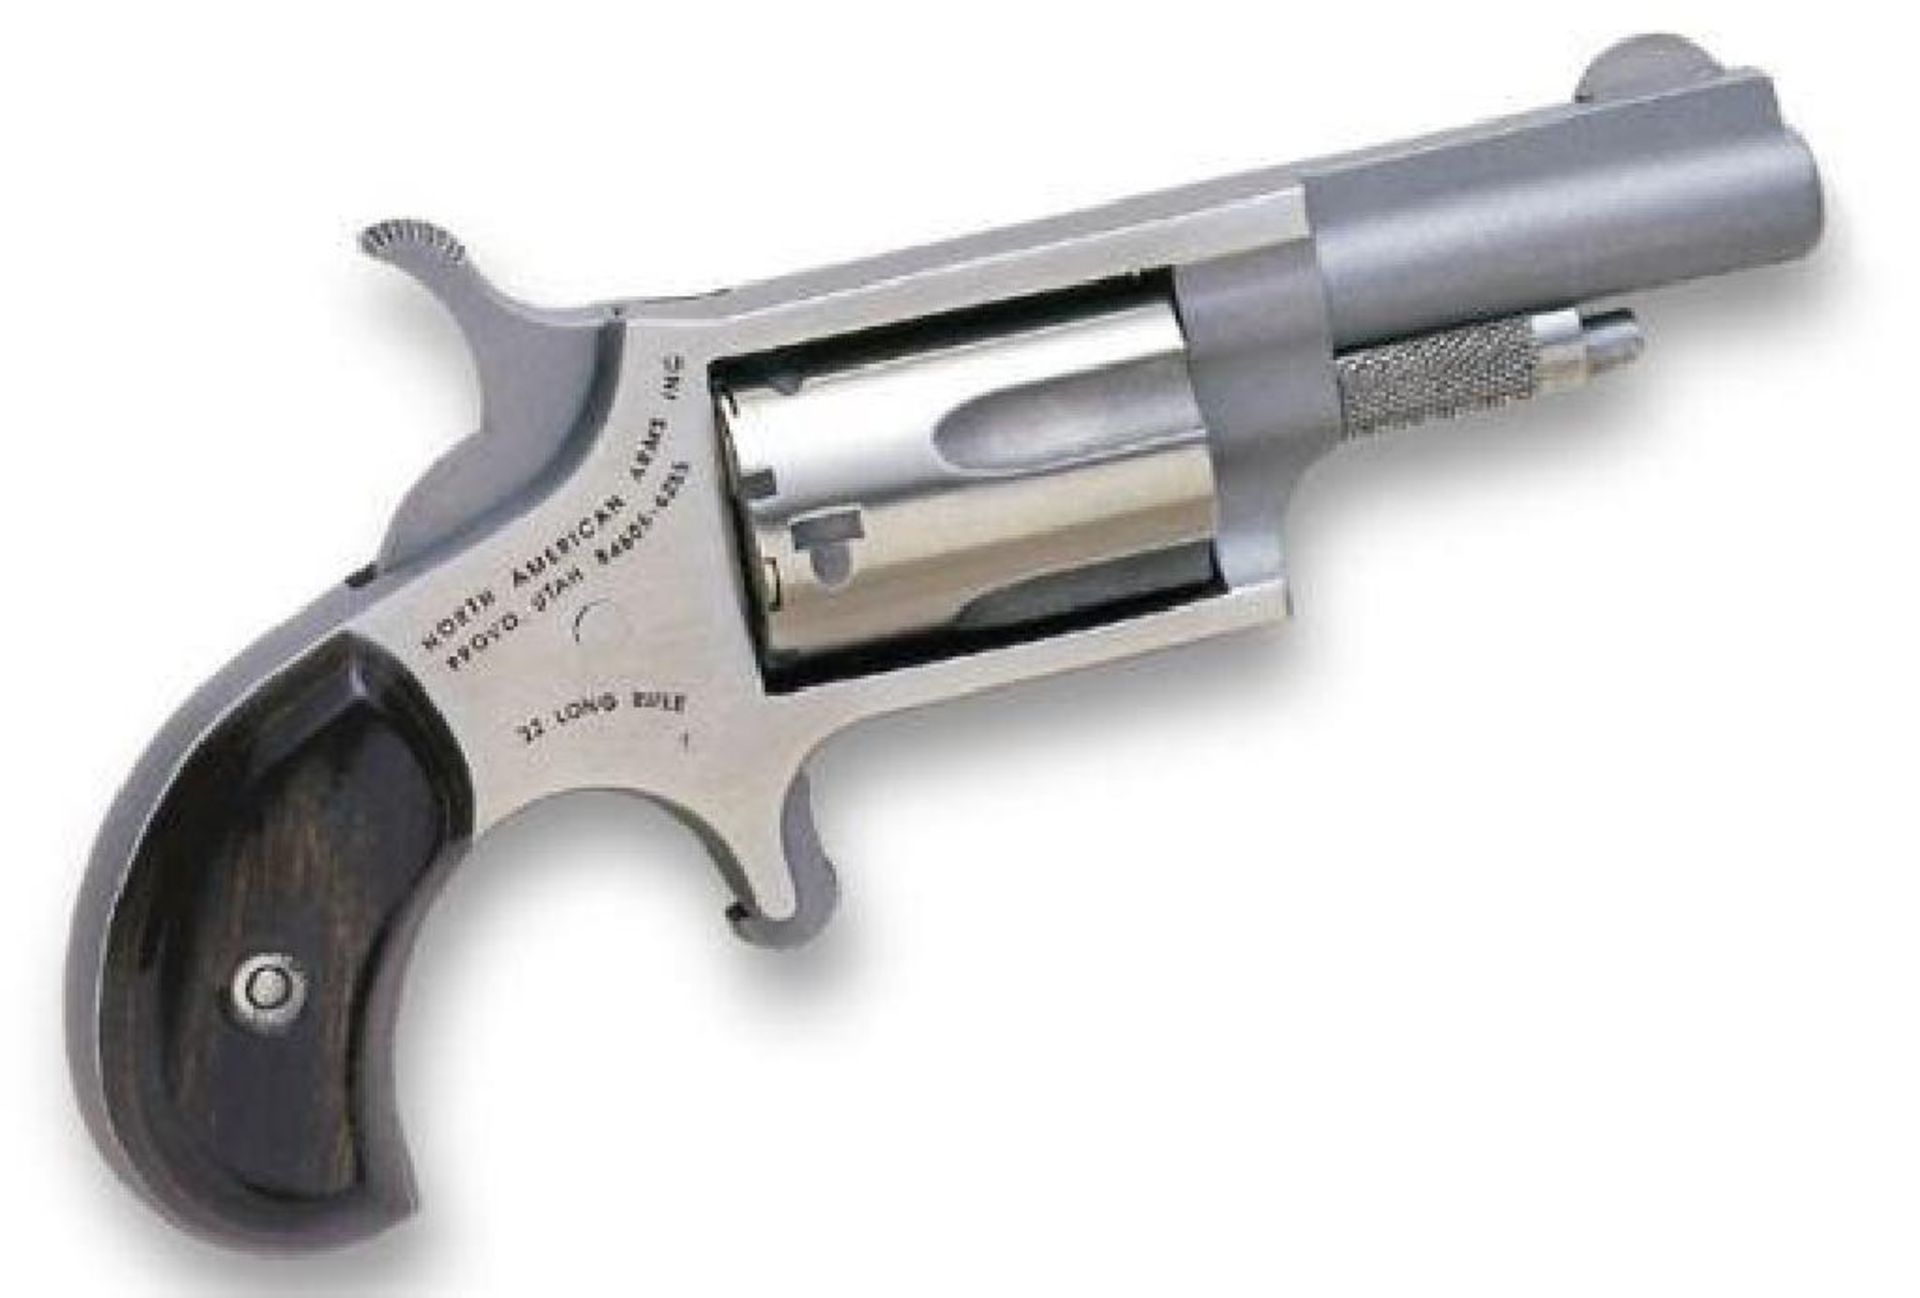 North American Arms, Mini Revolver, Single Action, 22LR, 1.625" Barrel, Steel Frame, Stainless